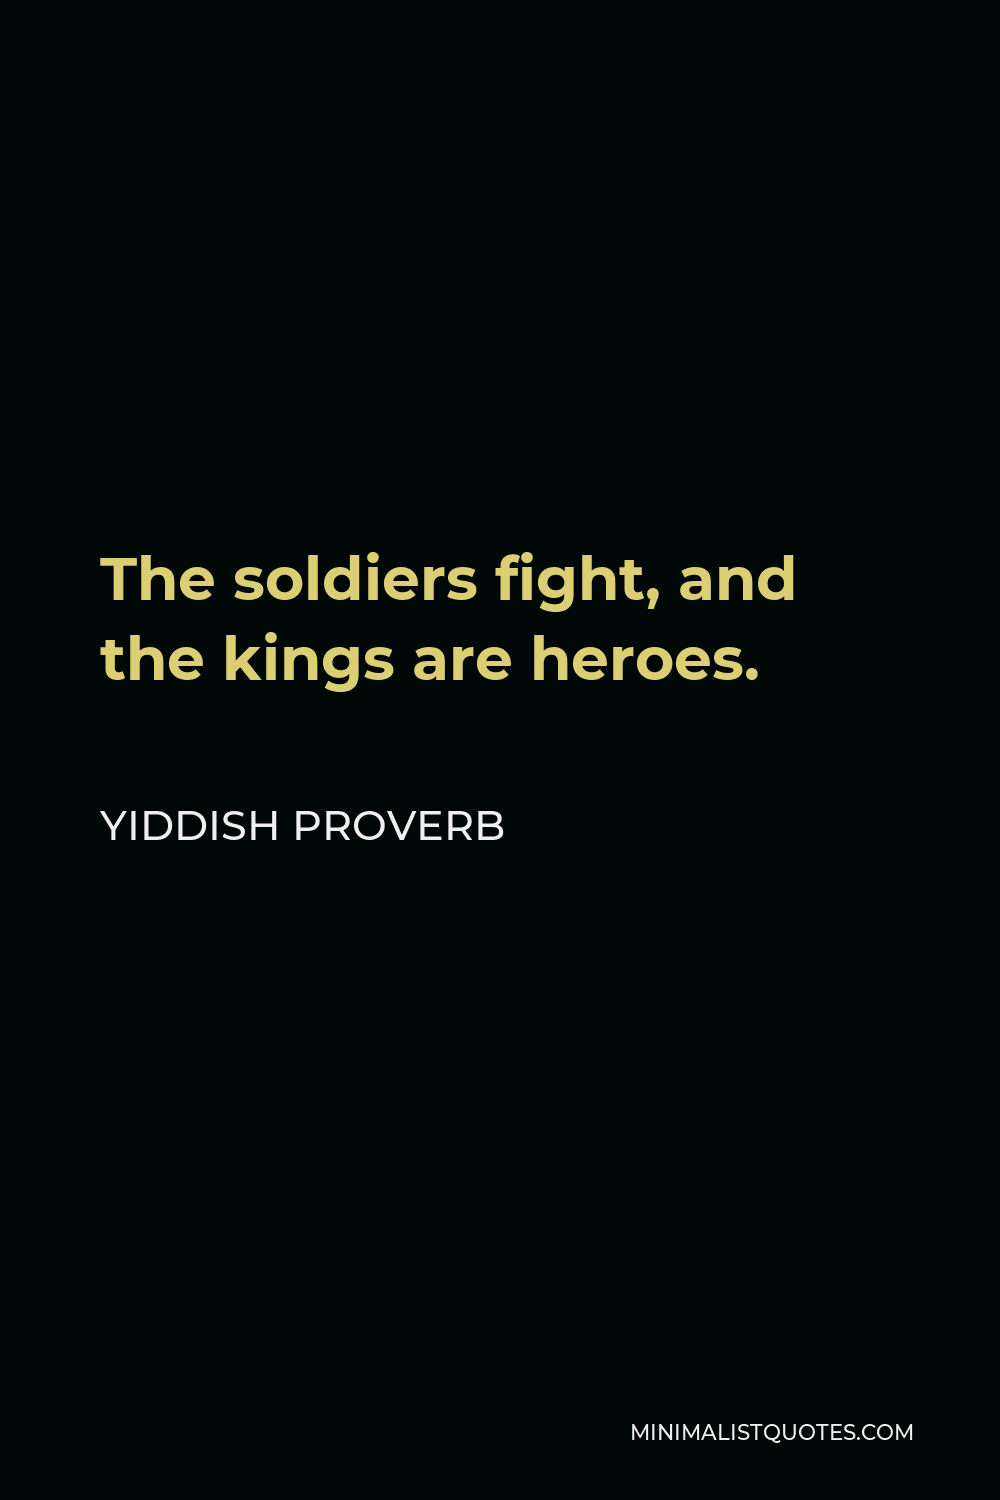 Yiddish Proverb Quote - The soldiers fight, and the kings are heroes.